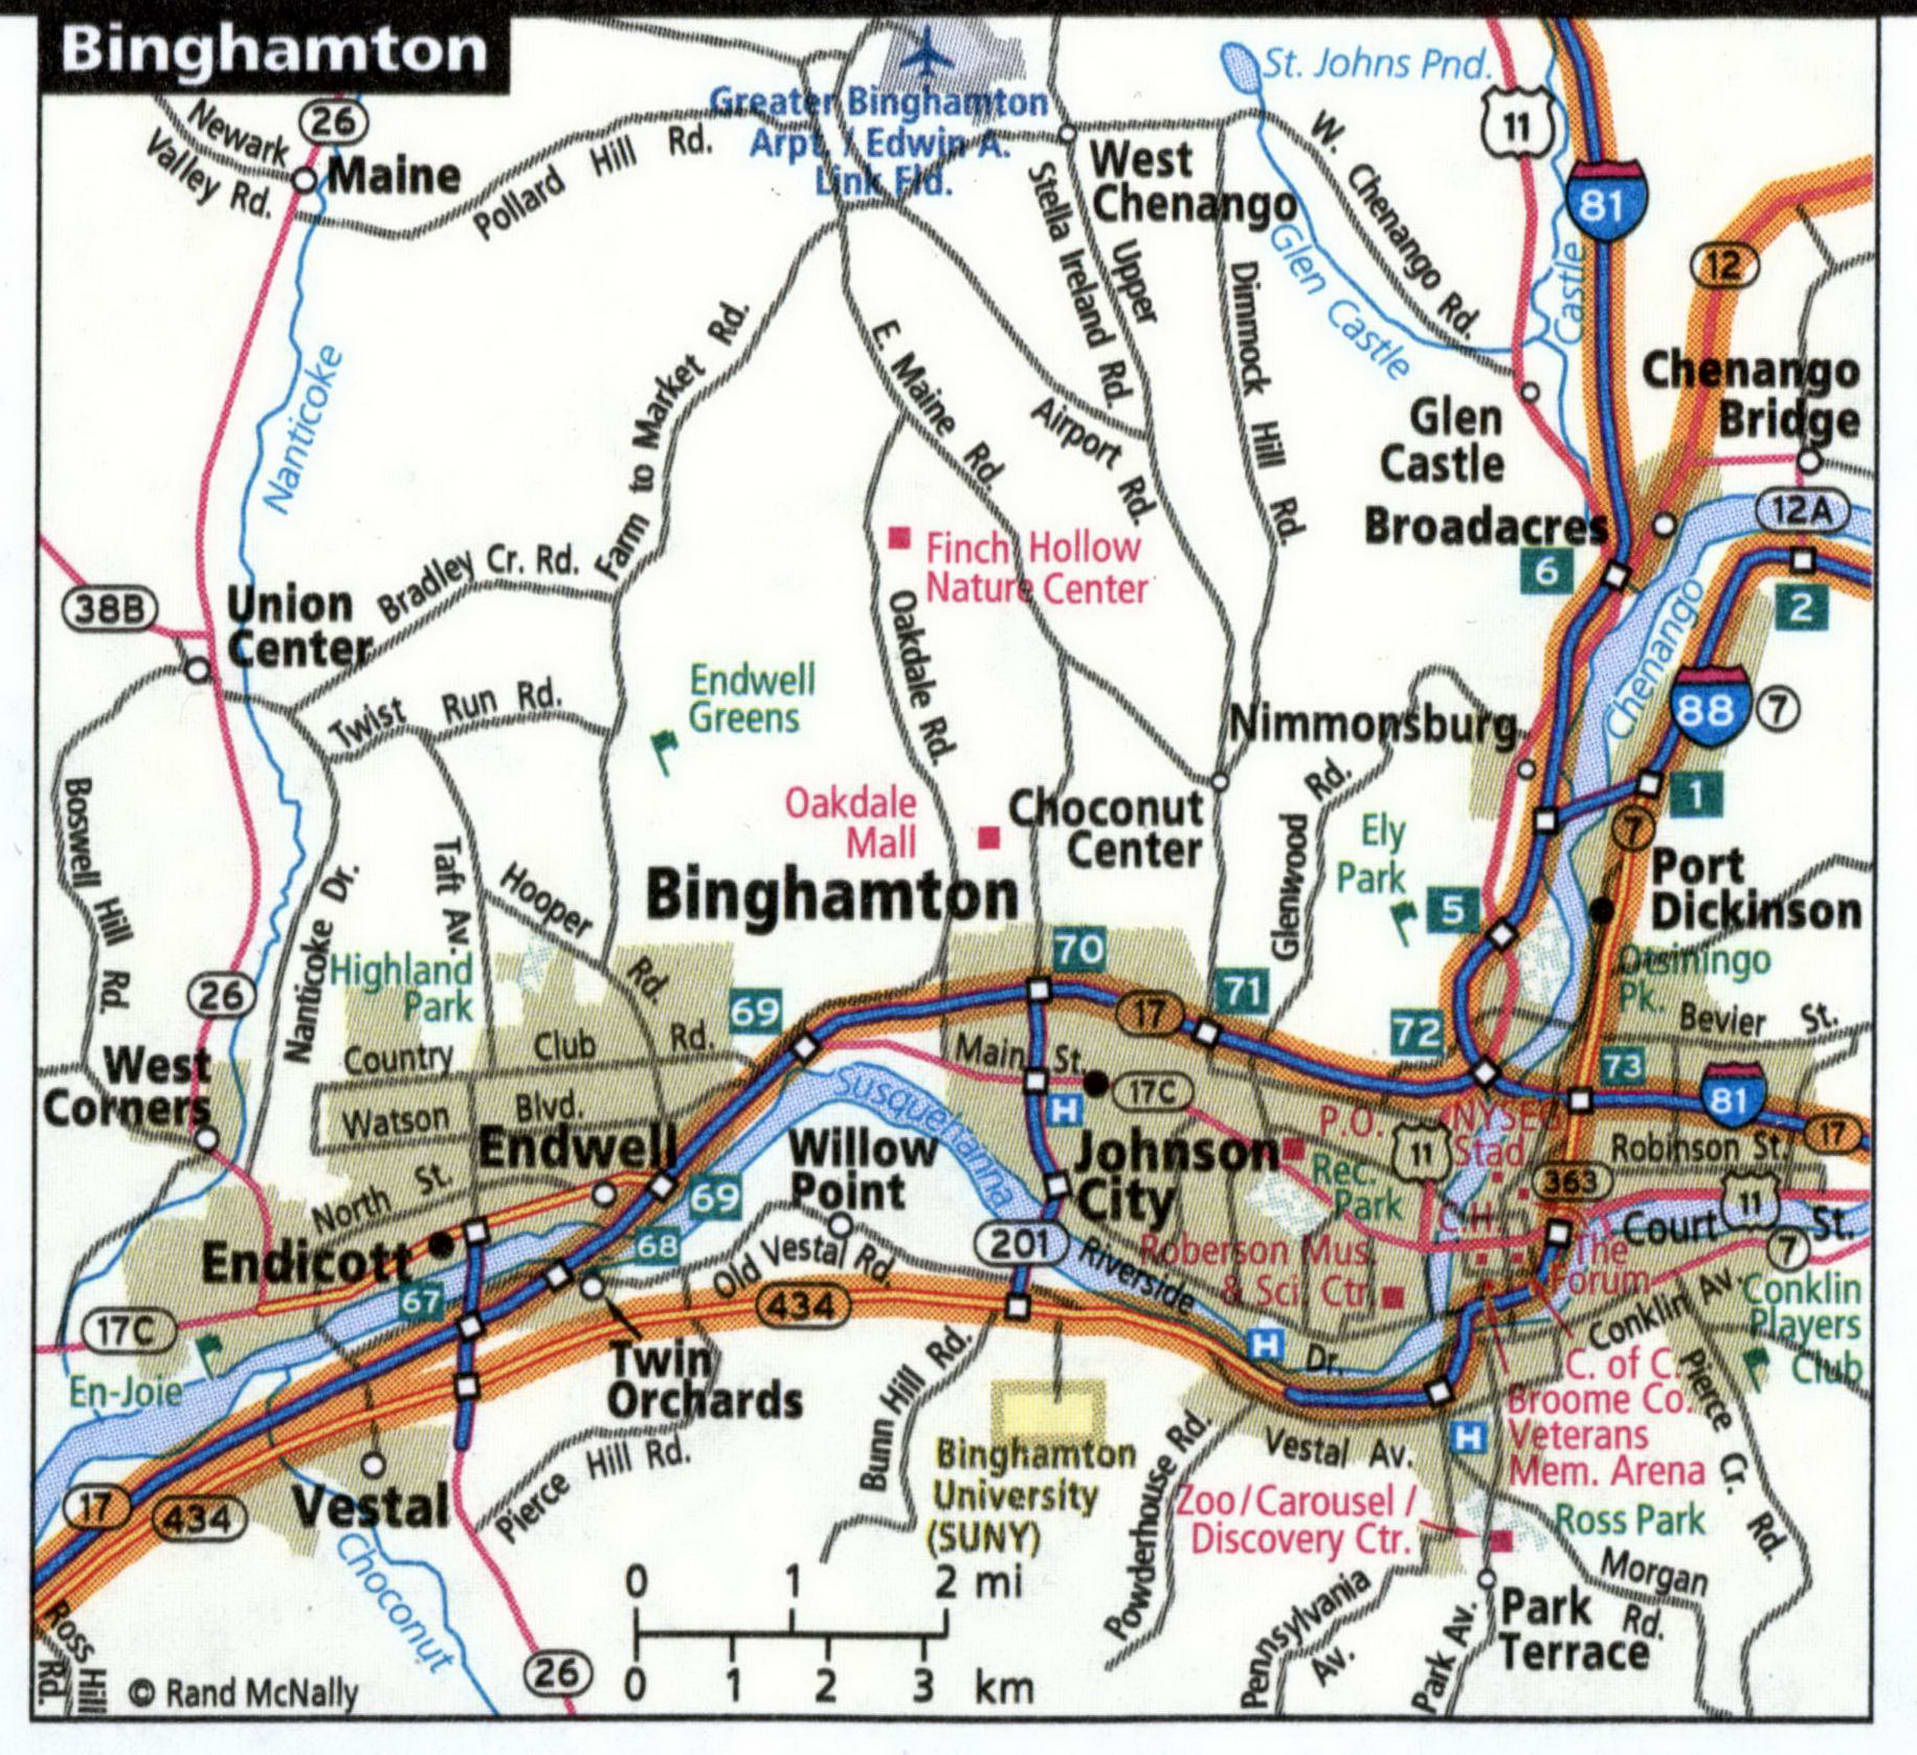 Binghamton city road map for truck drivers area town toll and free ...